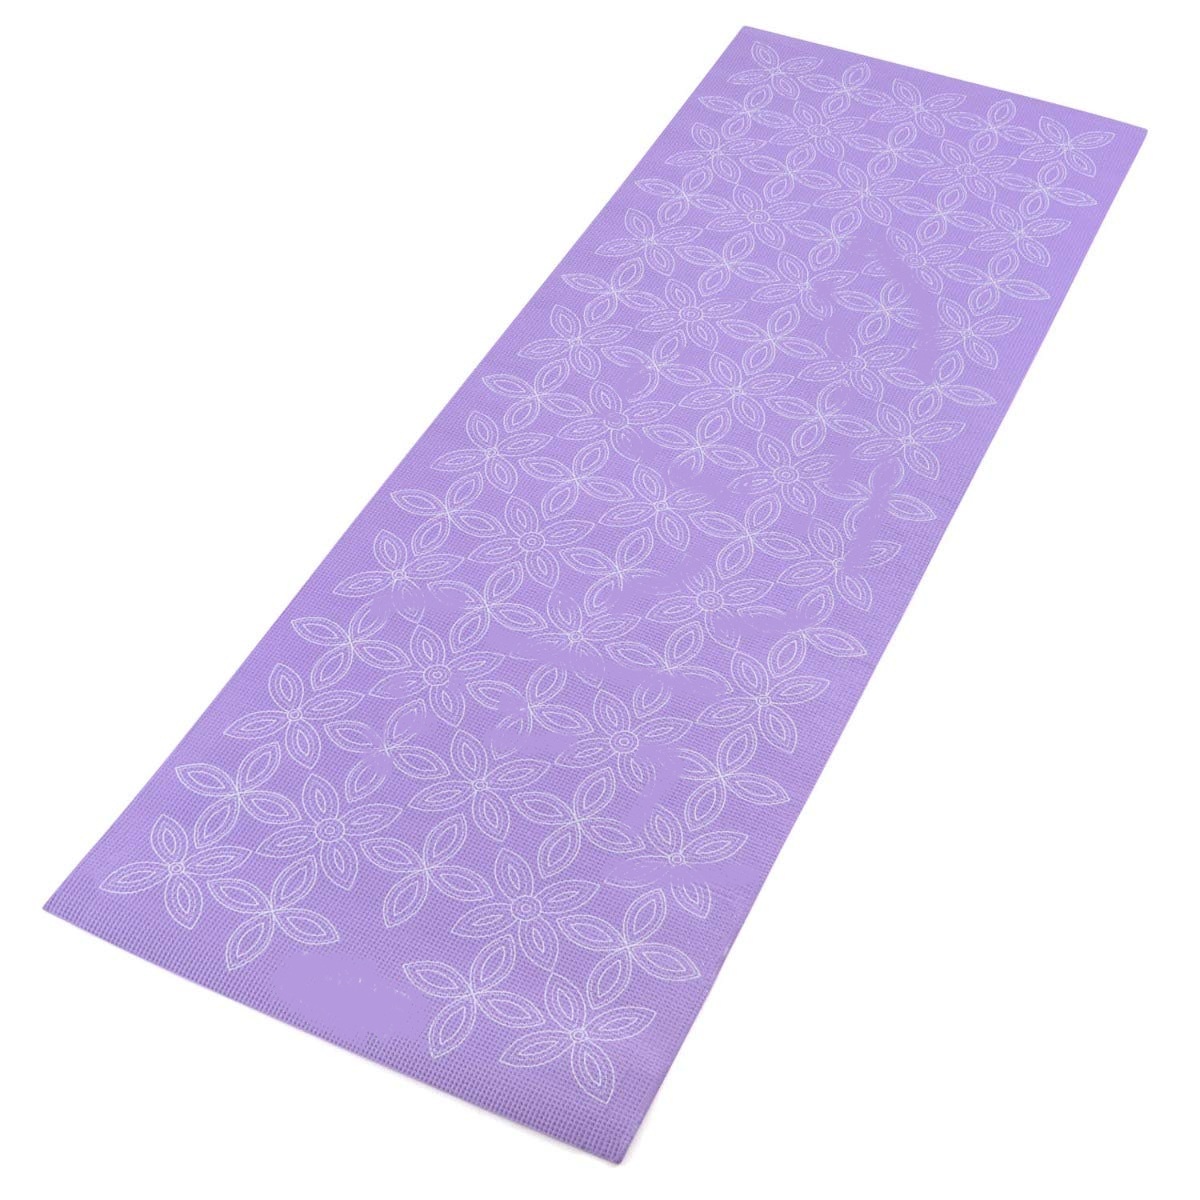 product-Universal Outdoor 6mm TPE Non-slip Yoga Mats Tasteless Pilates Gym Exercise Sport Pads for F-1